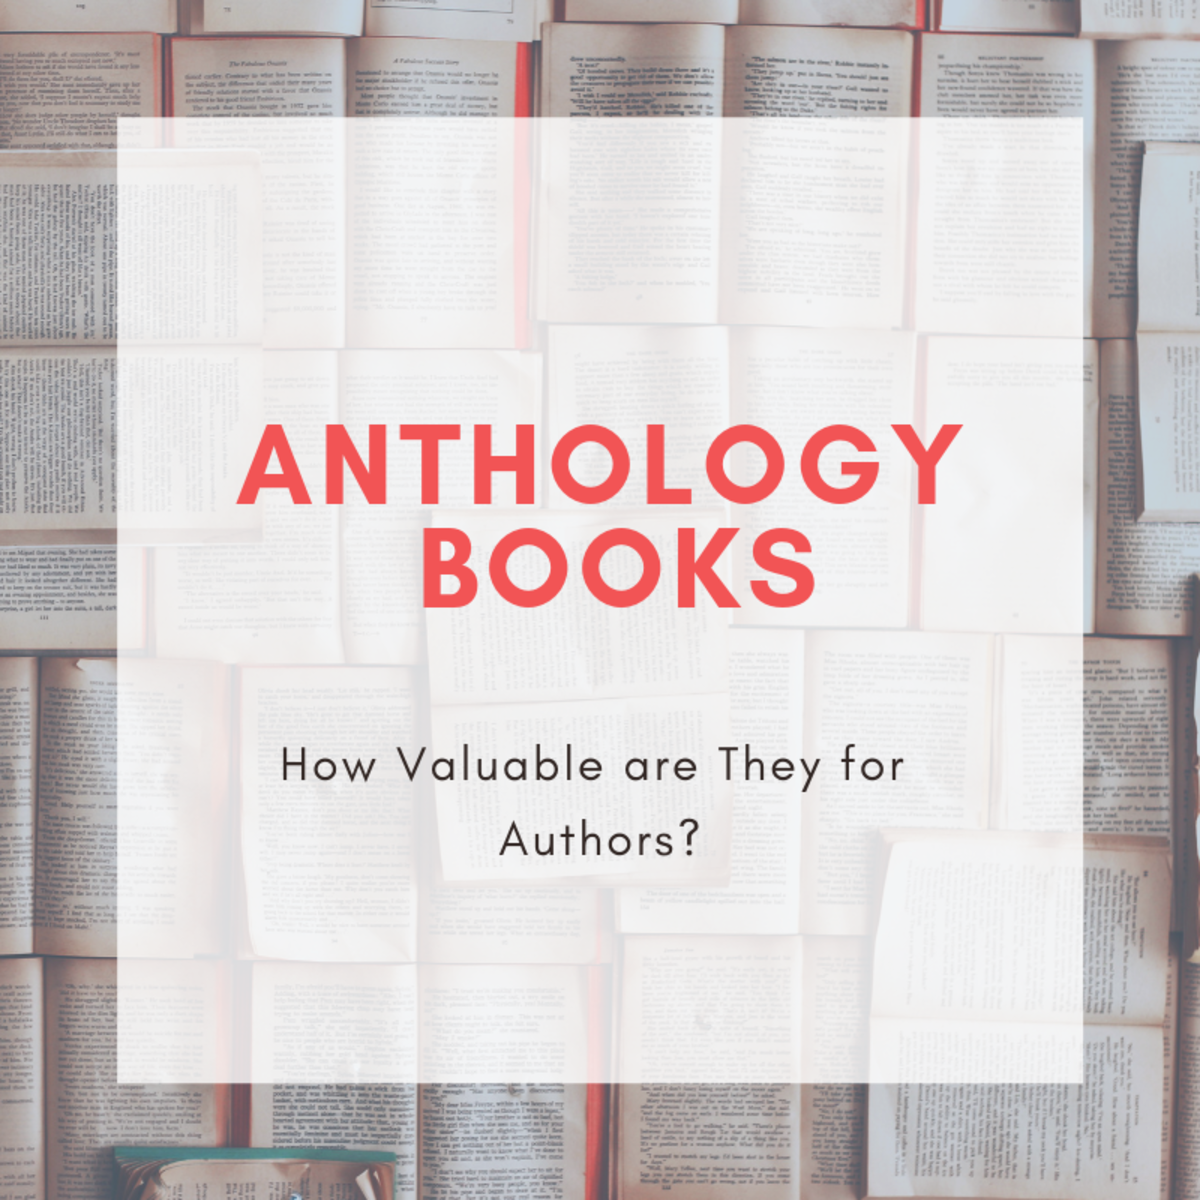 Anthology Books: How Valuable Are They for Authors?